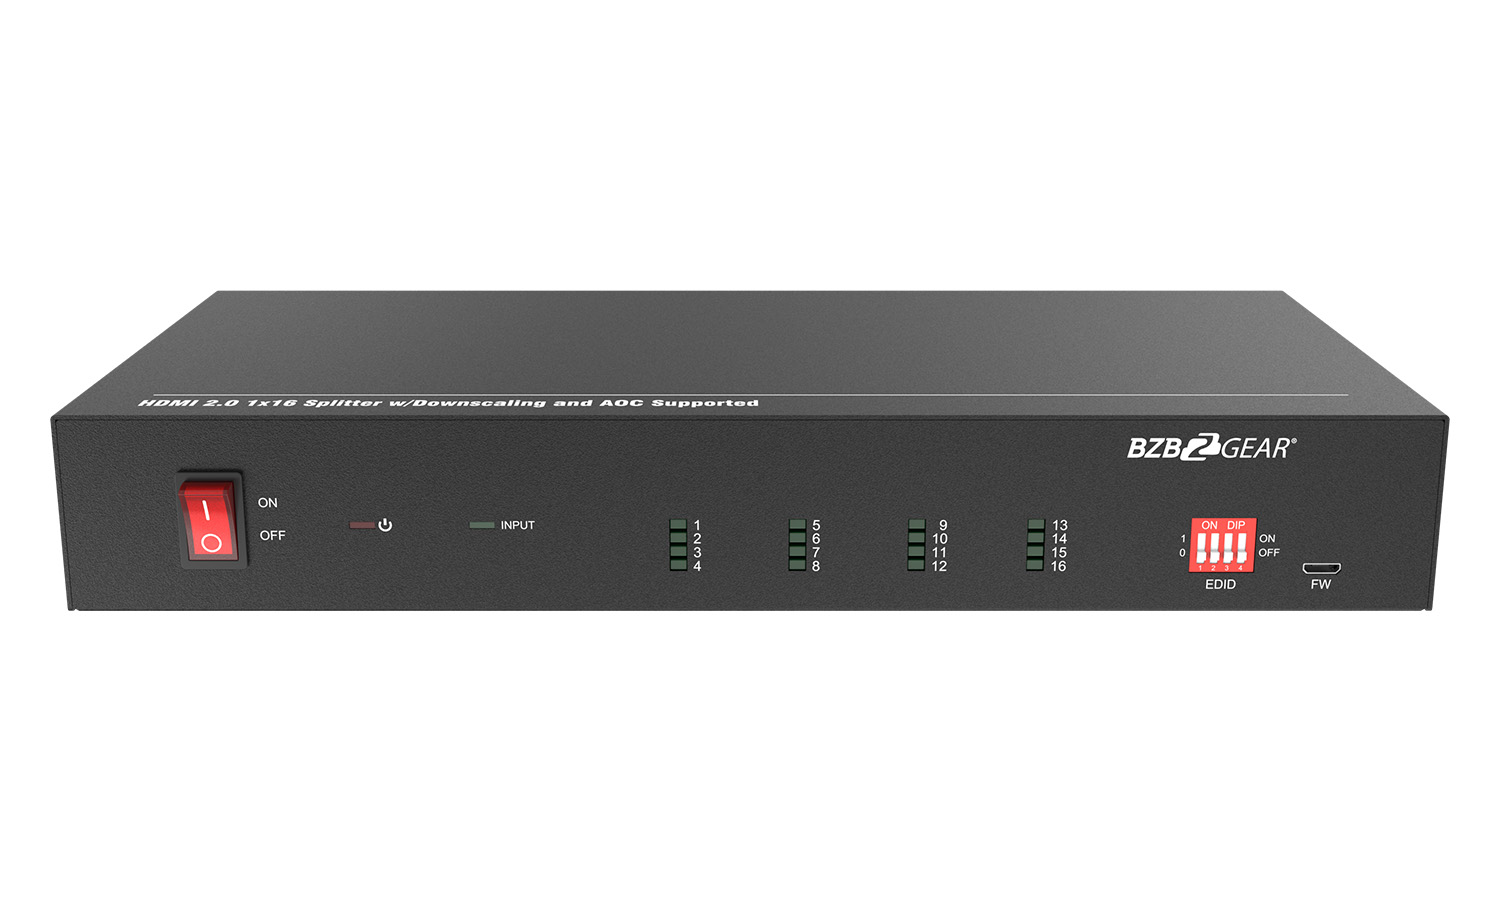 BG-UHD-DA1X16 1X16 4K 18Gbps UHD HDMI Splitter with Downscaling/Audio De-Embedding/RS-232 and AOC Cables Support by BZBGEAR